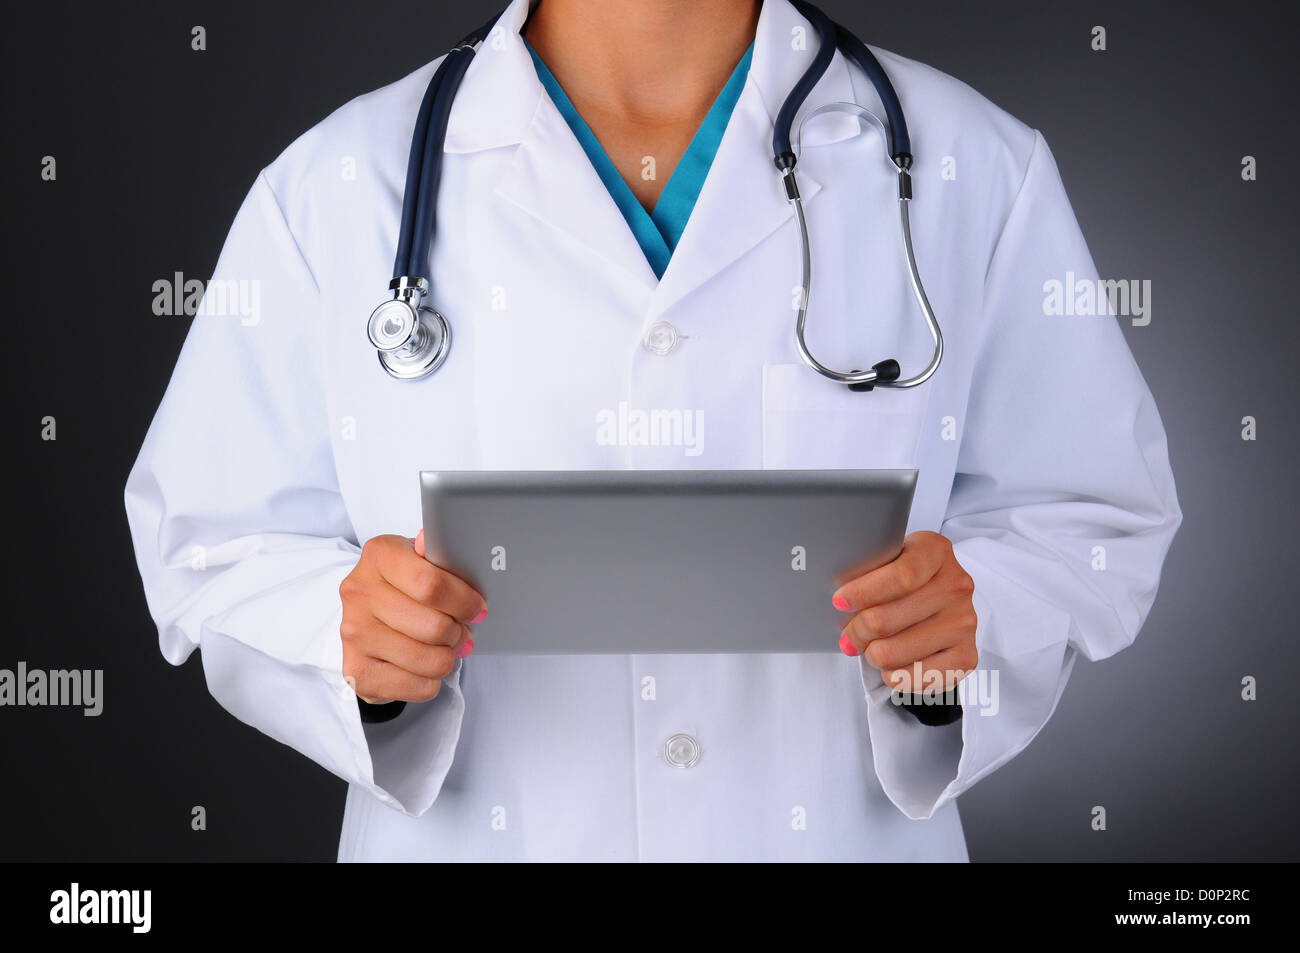 Closeup of a female medical professional wearing scrubs and lab coat holding a tablet computer. Stock Photo